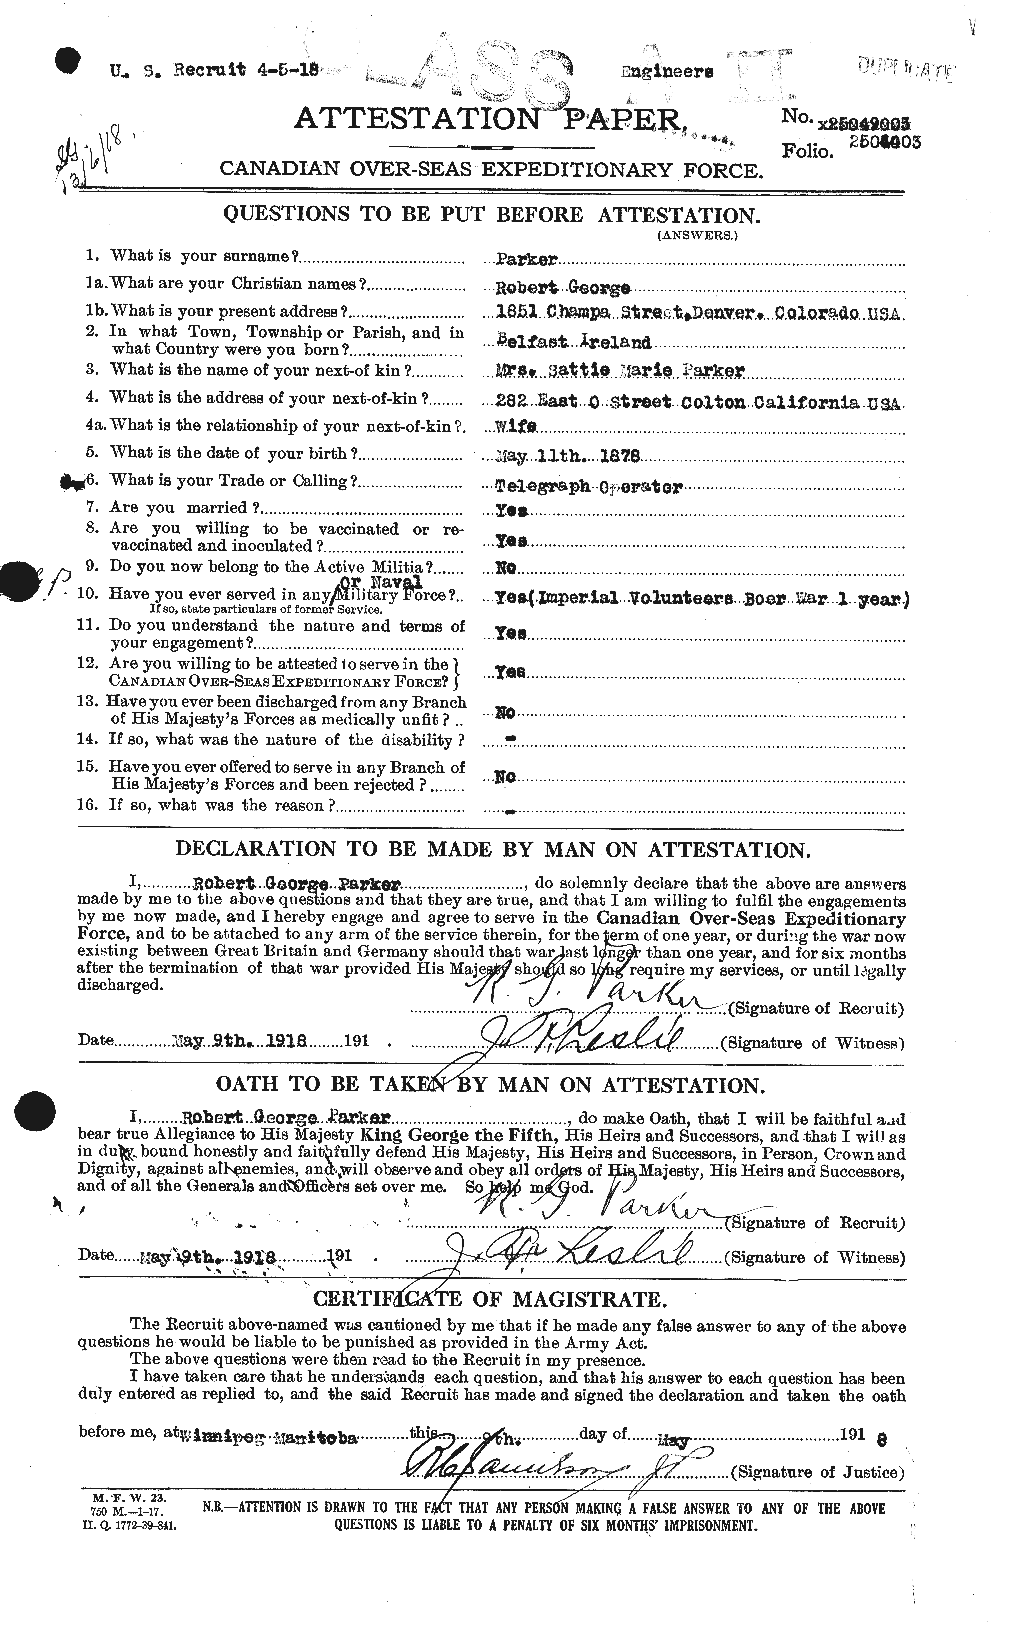 Personnel Records of the First World War - CEF 565603a